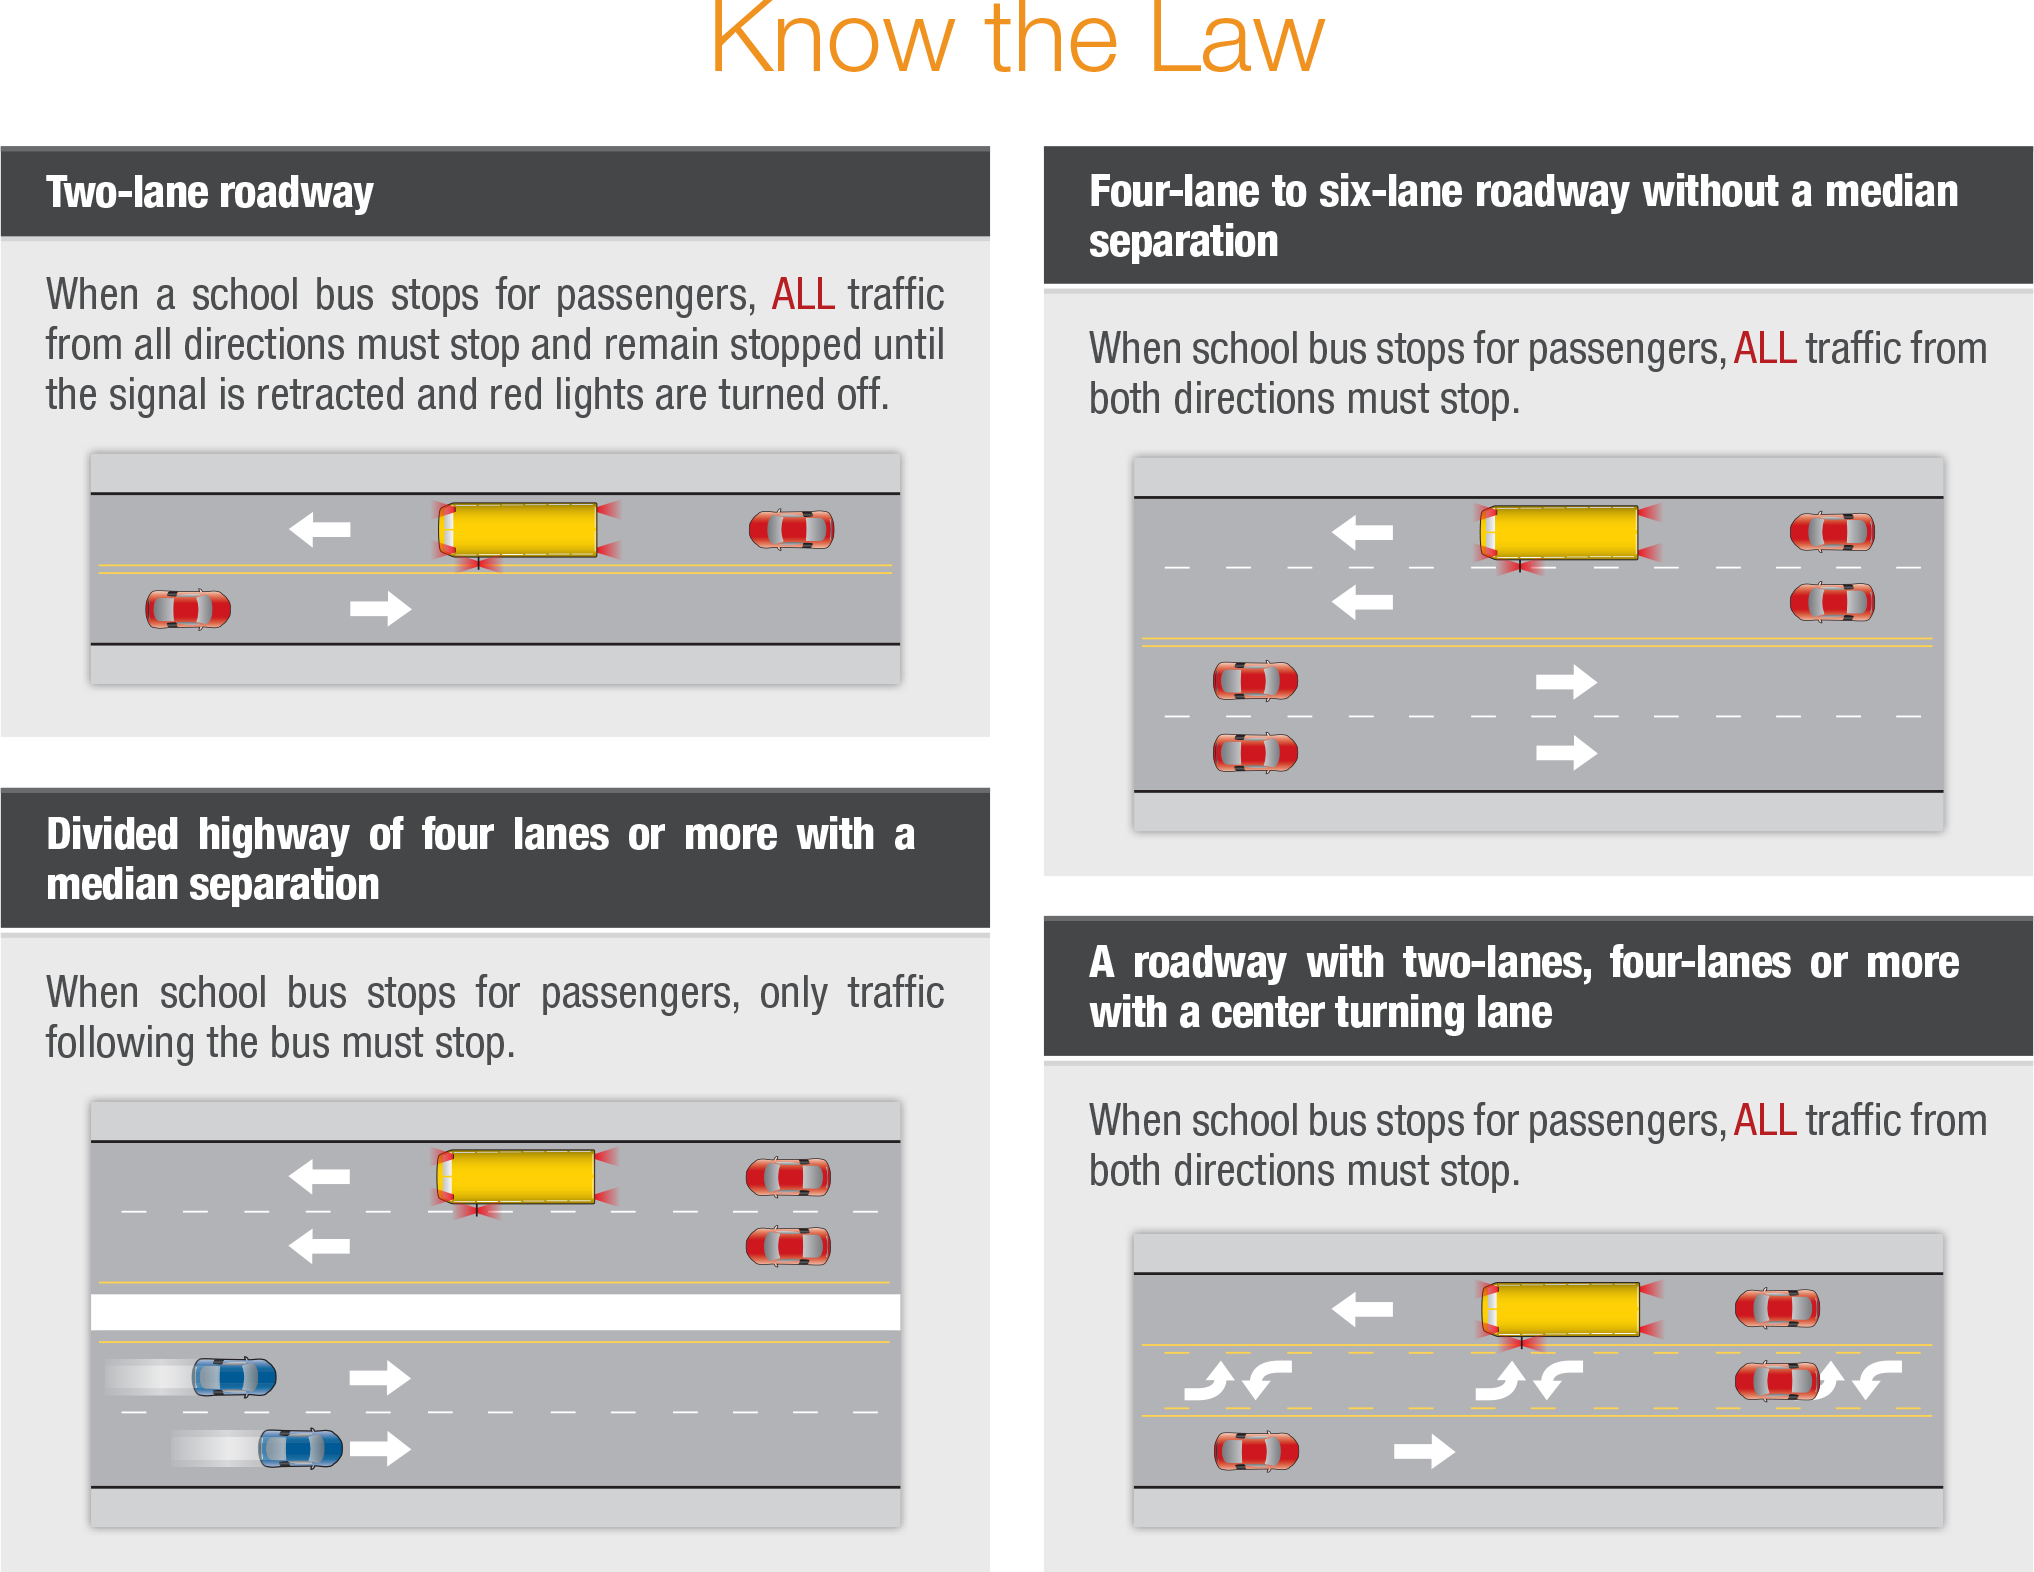 Know the law